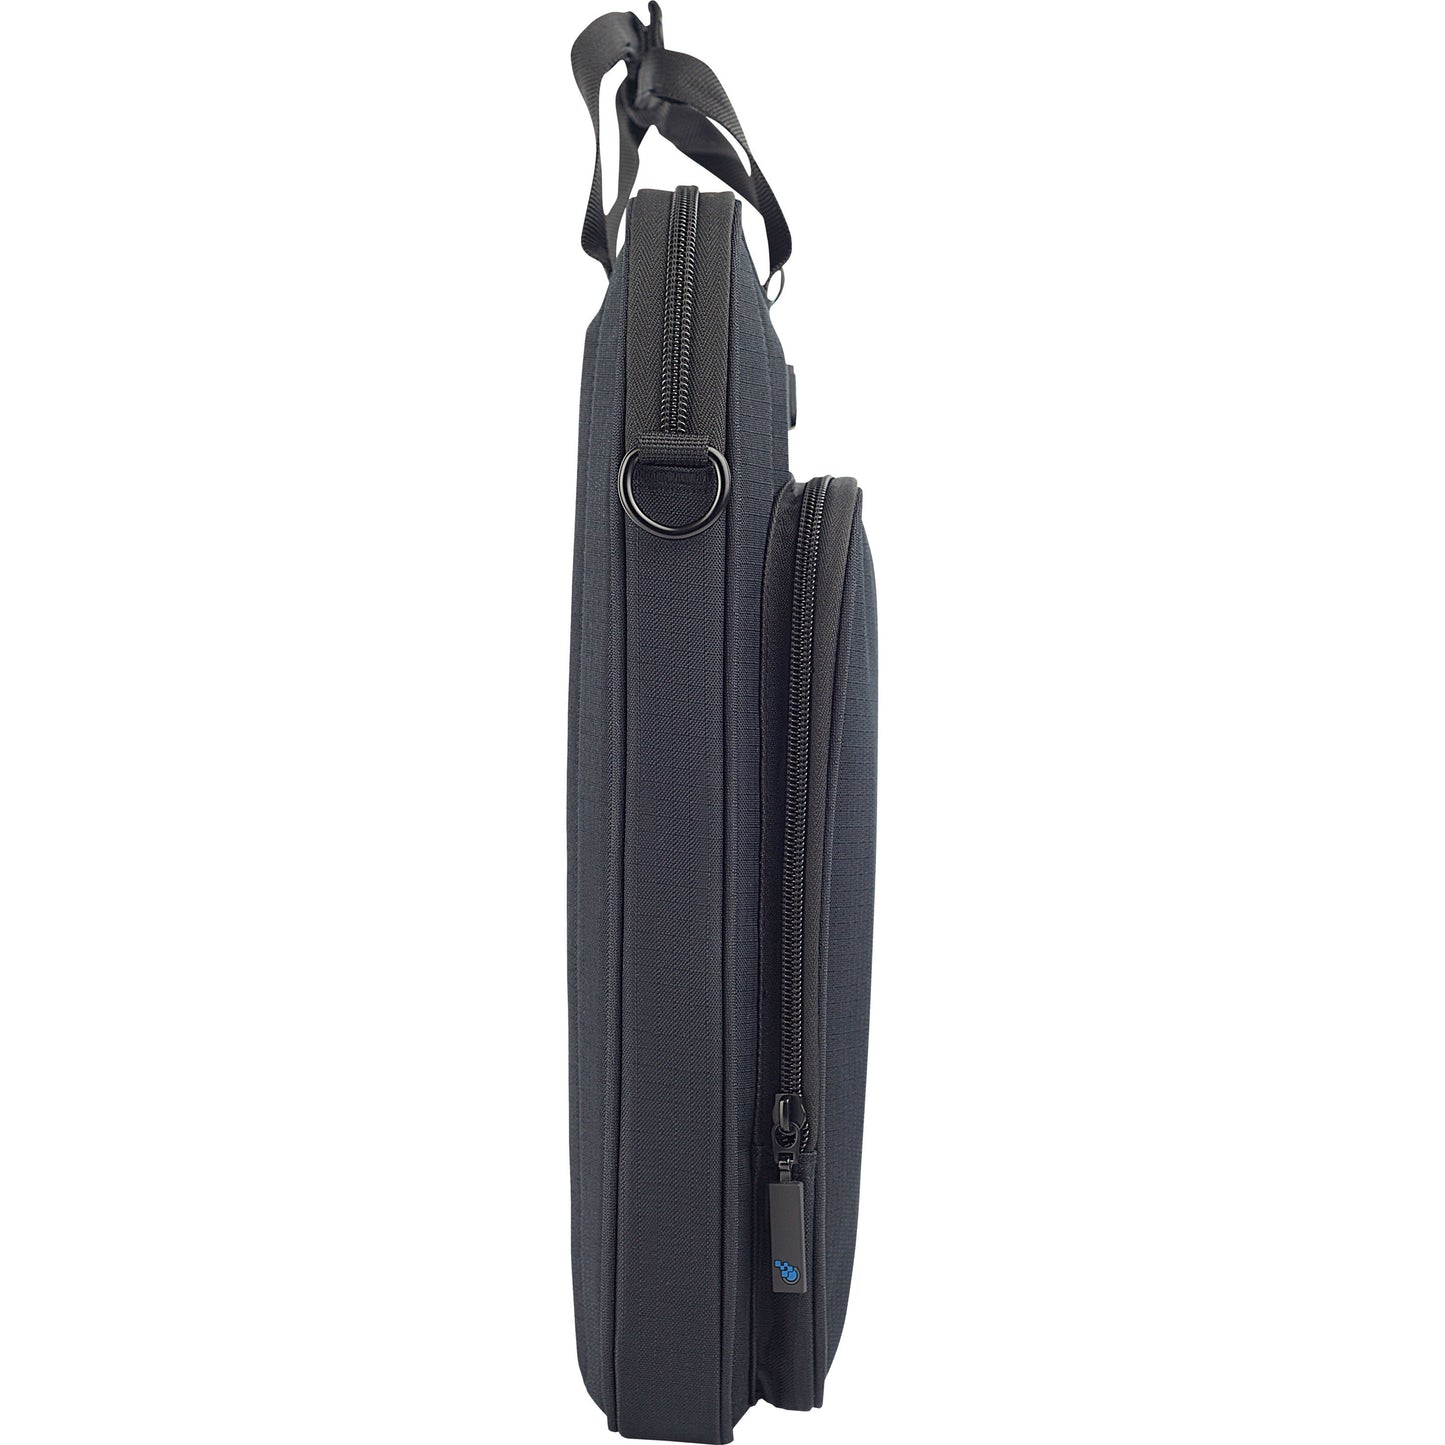 TechProducts360 Vertical Vault Carrying Case for 13" Notebook - Black